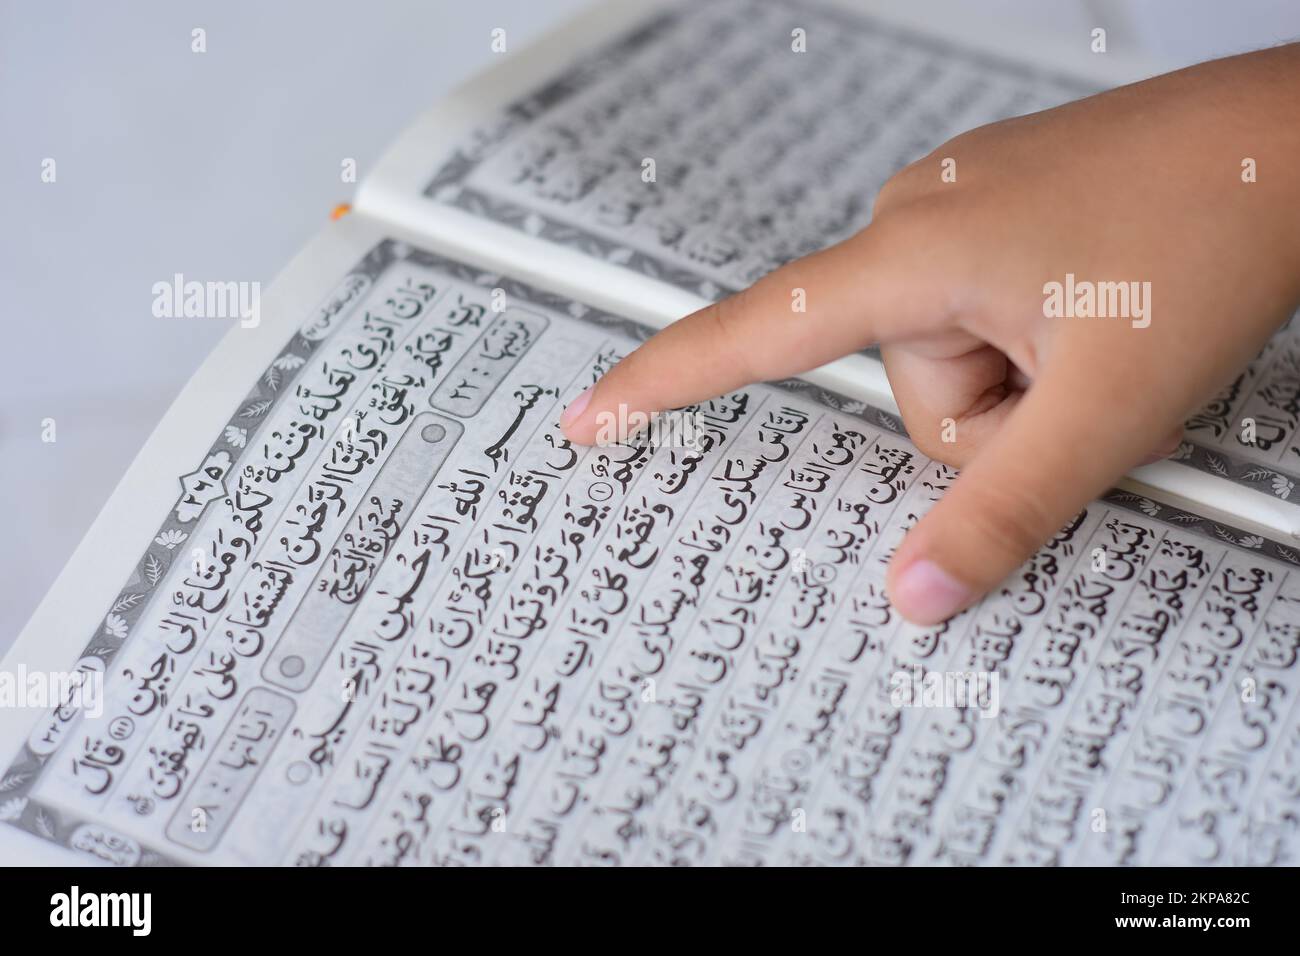 refers to one of the verses of the holy quran Stock Photo